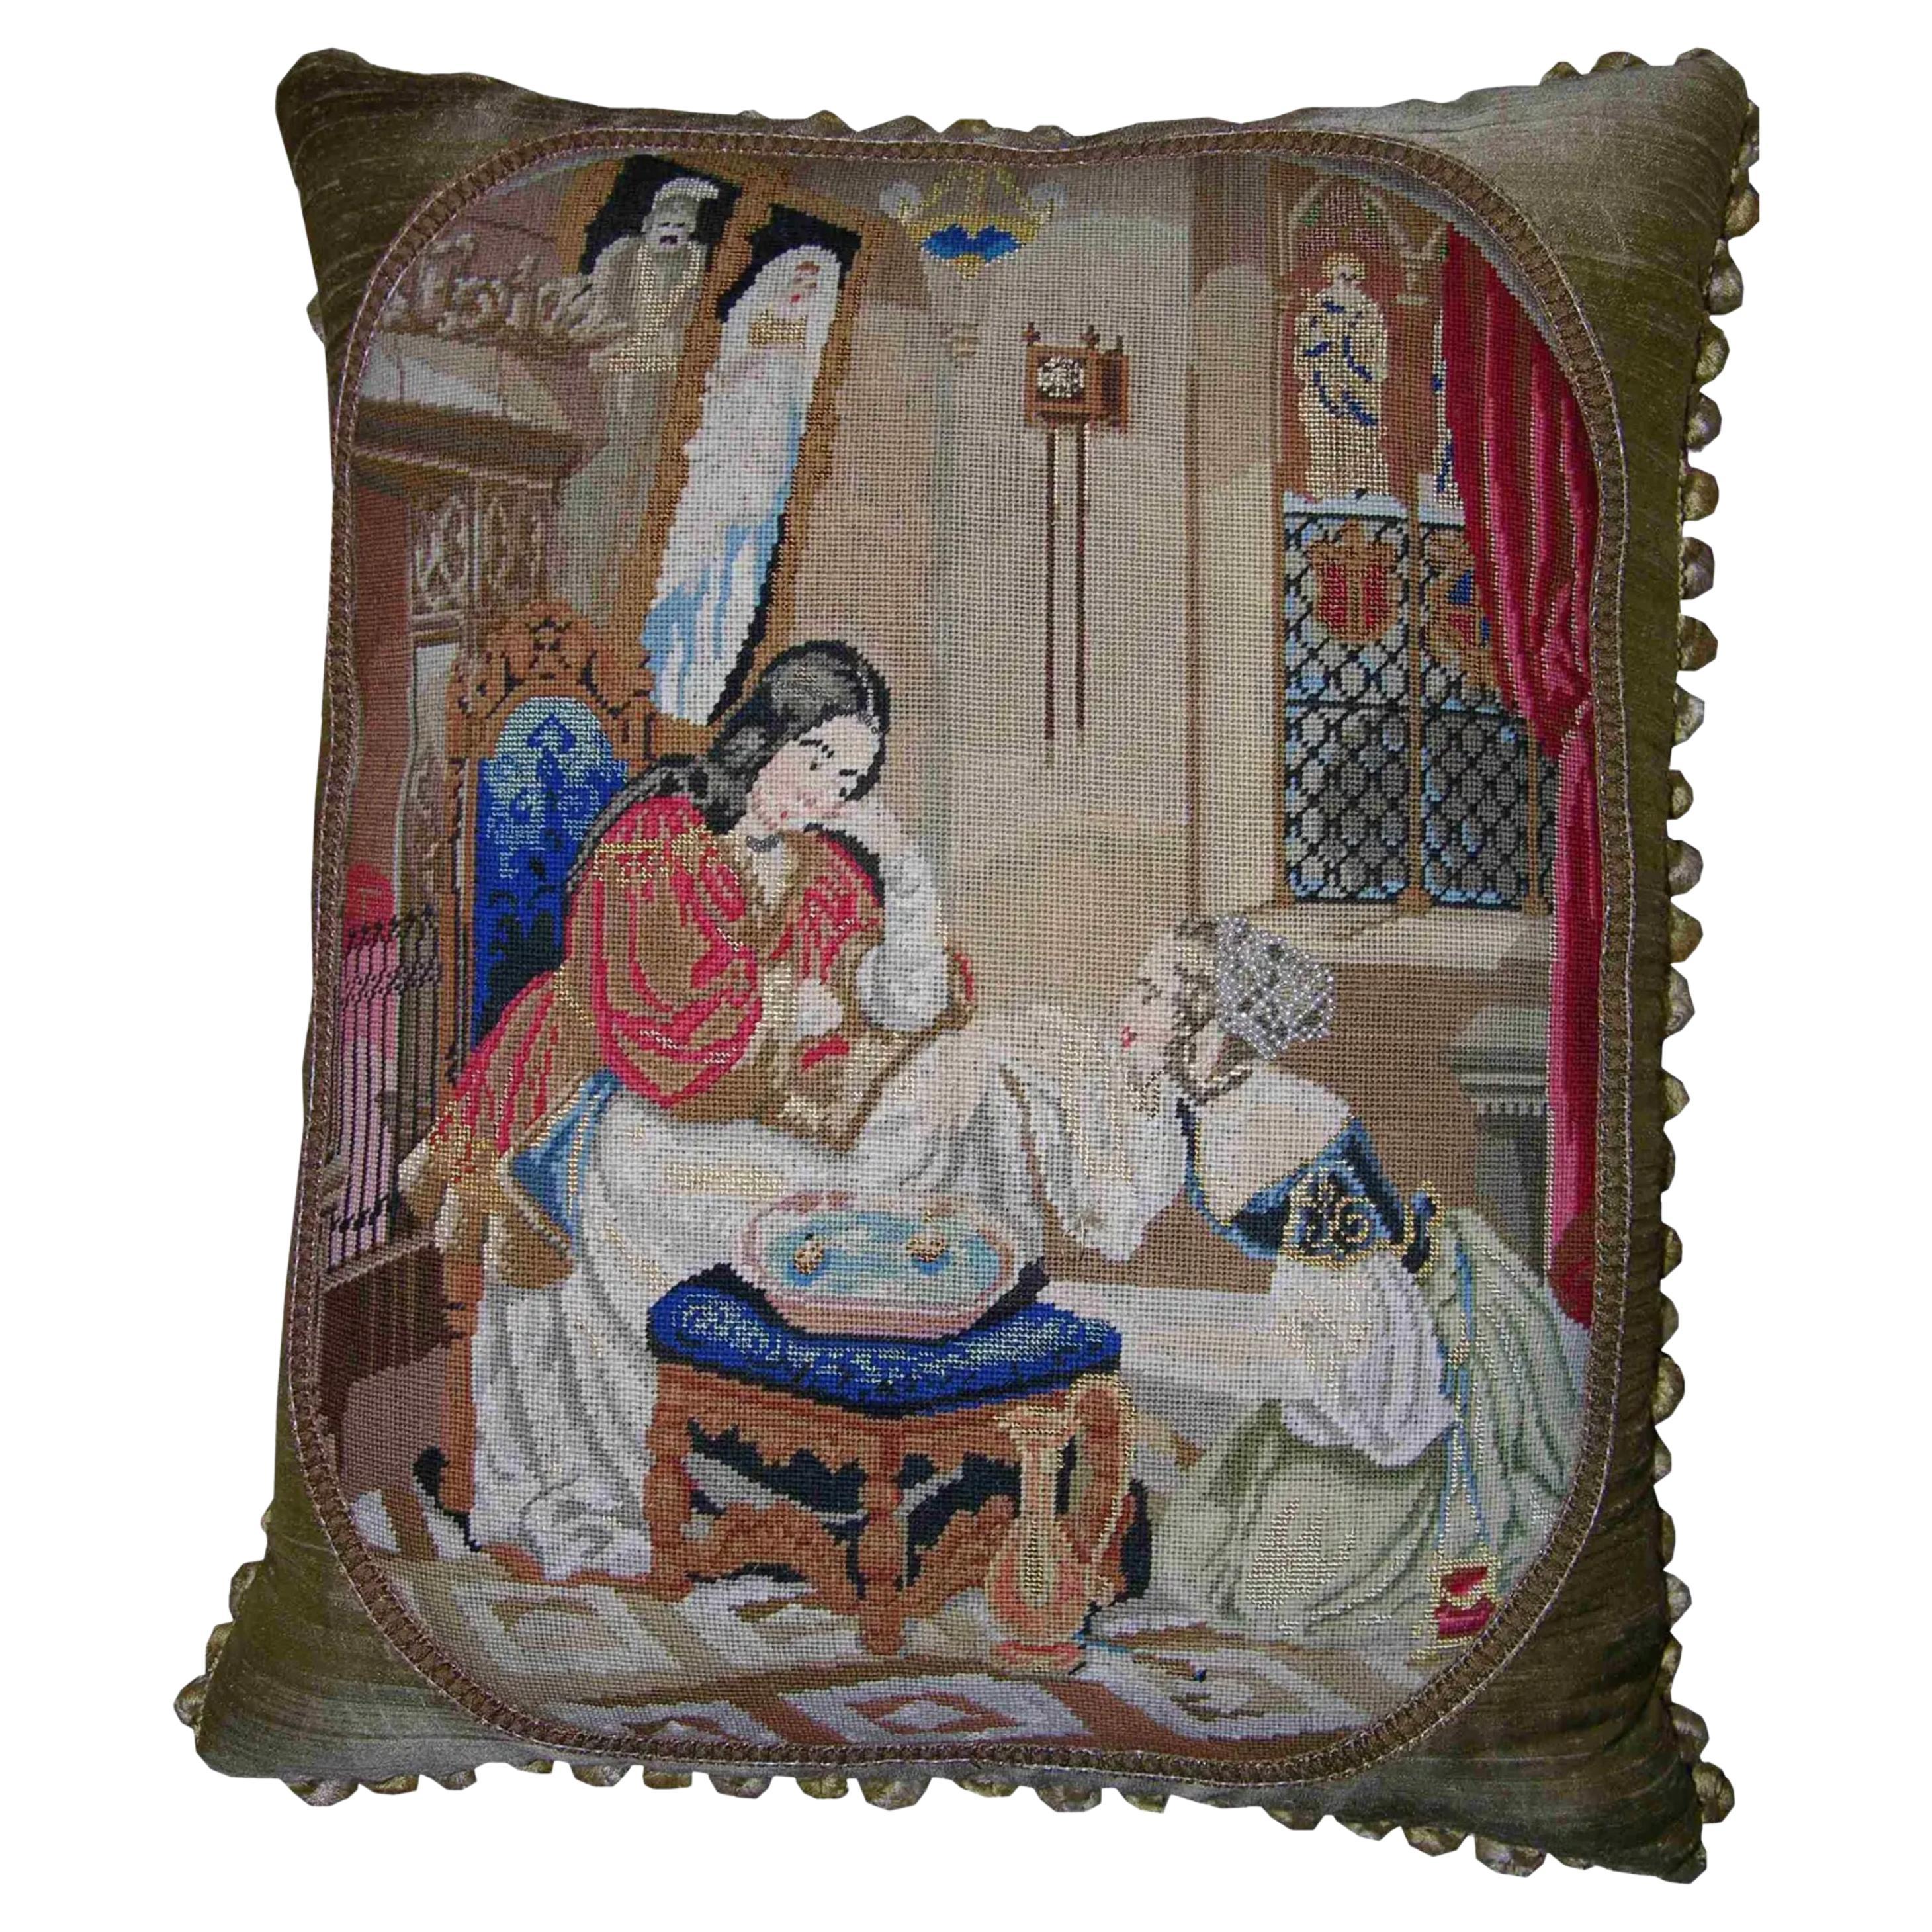 1880 Antique Needlepoint Tapestry Pillow - 21'' X 18'' For Sale